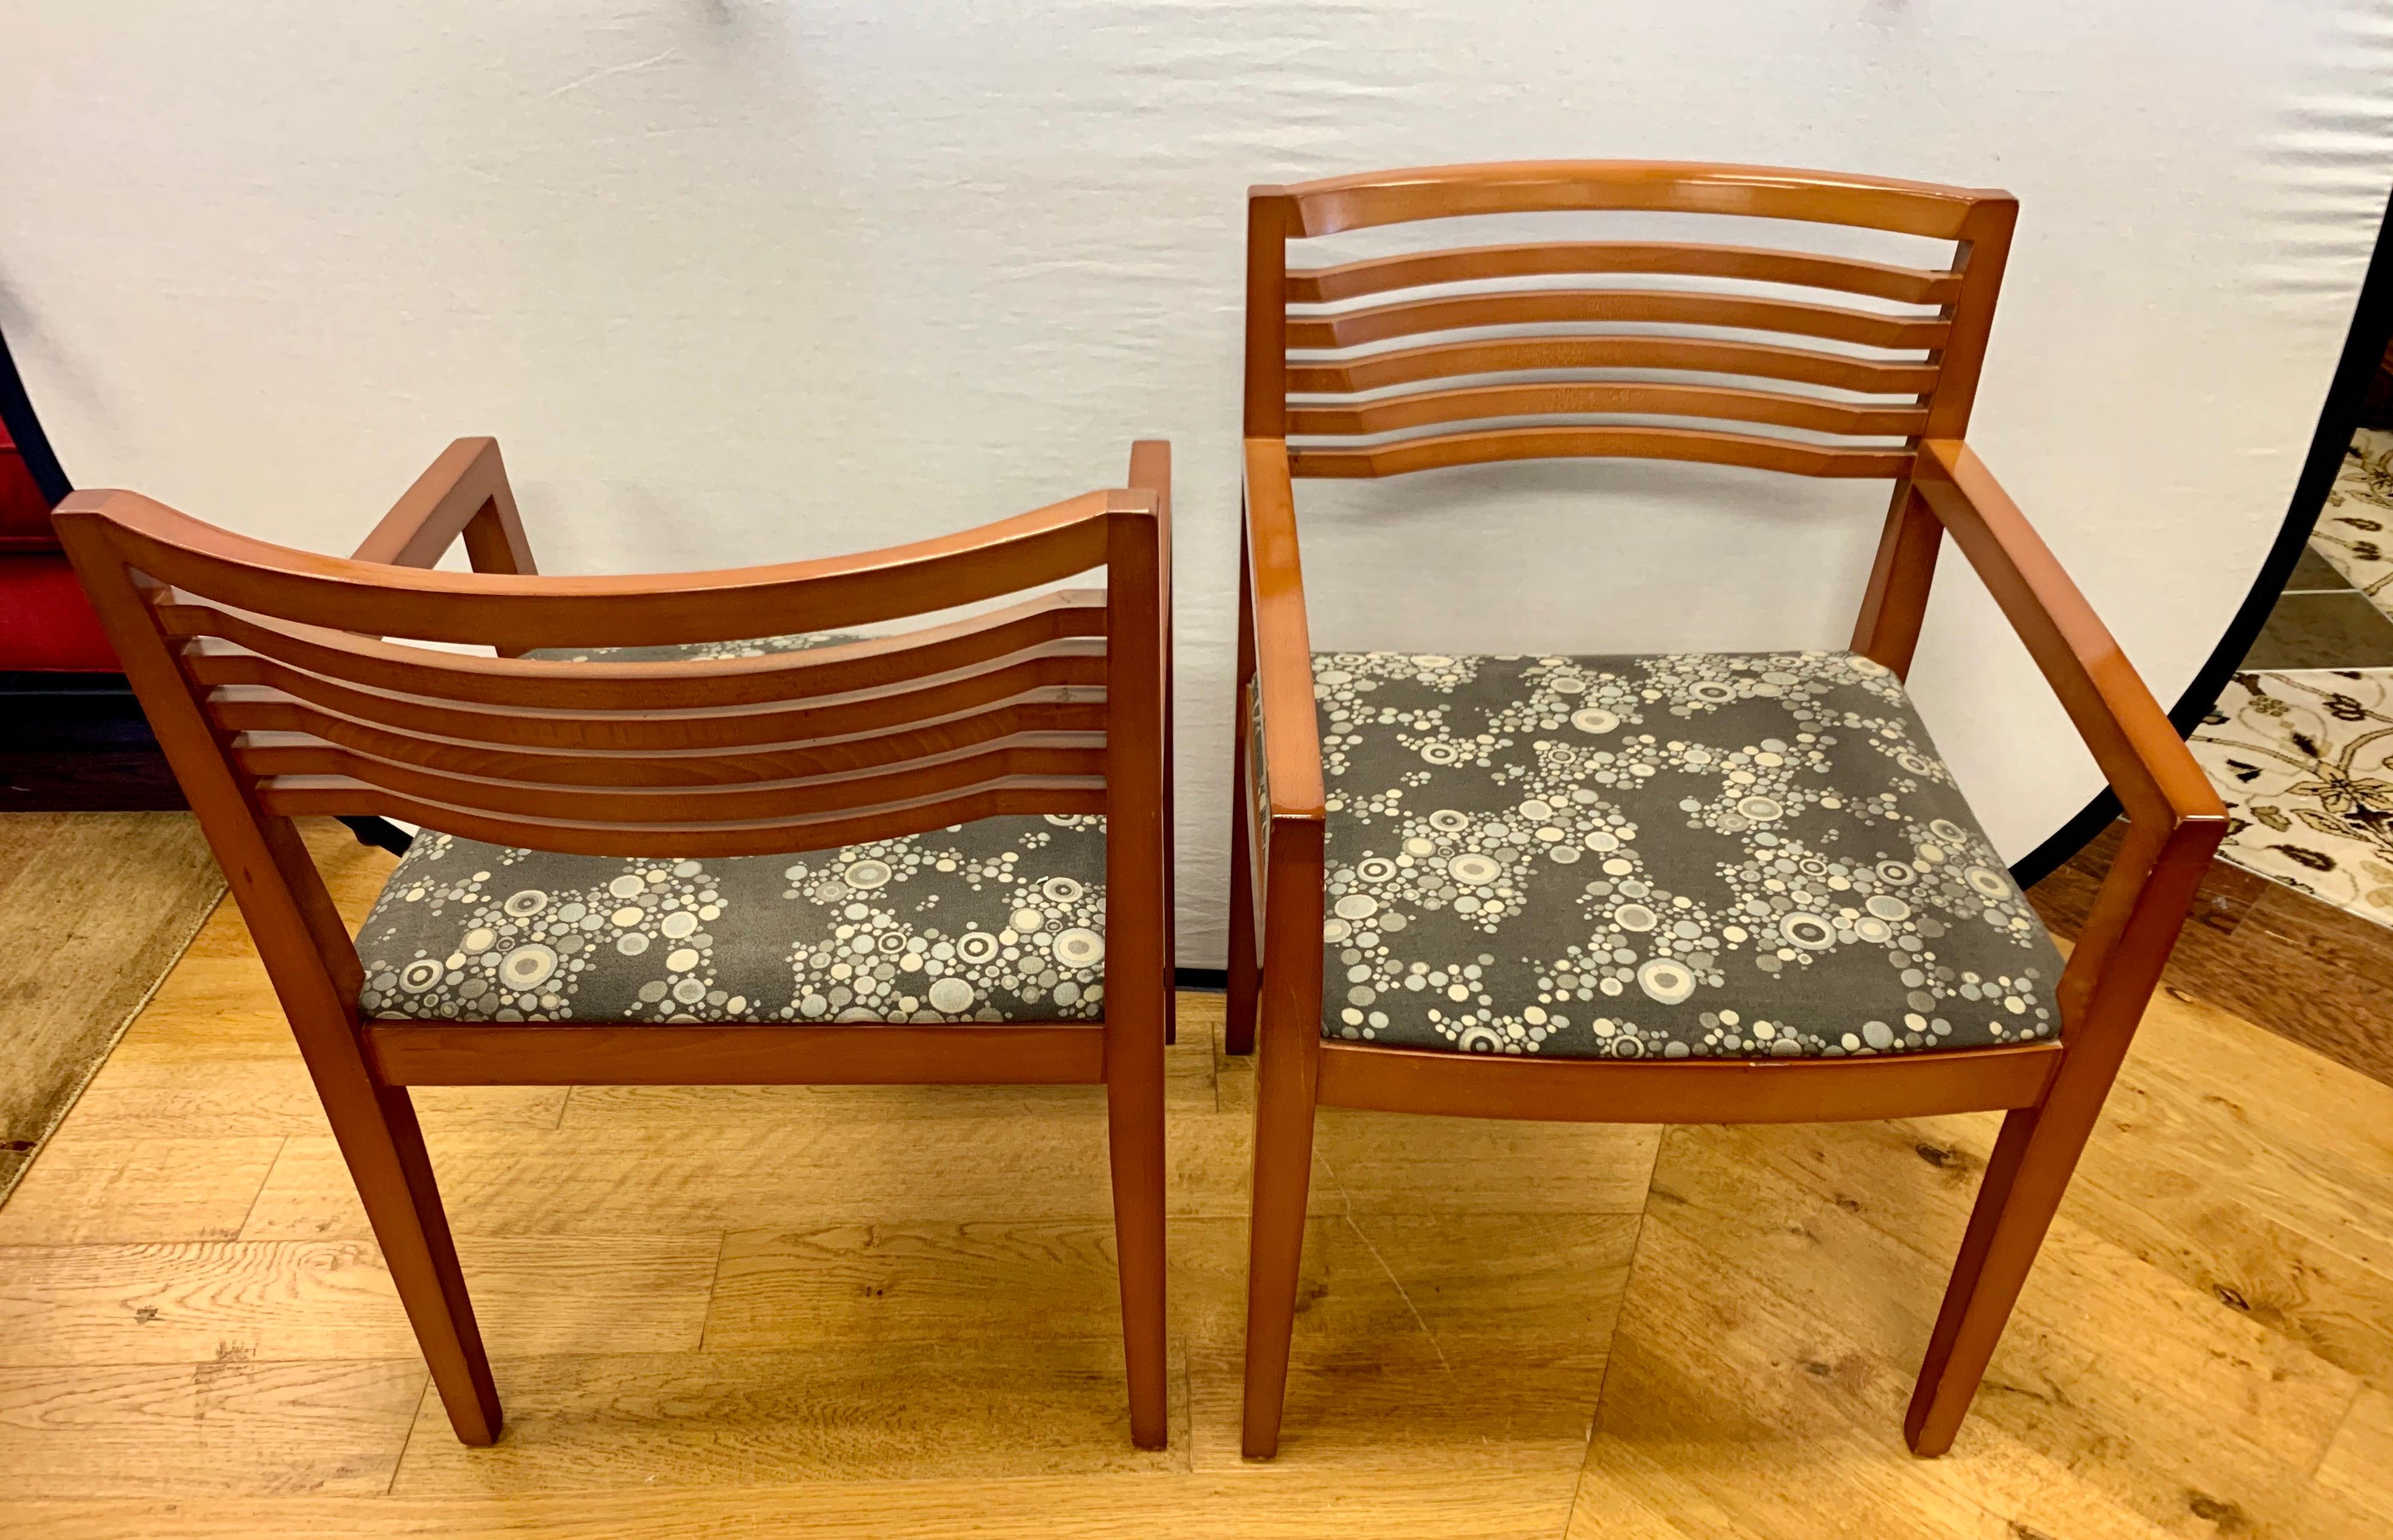 Set of four Knoll Studio Ricchio armchairs designed by Joseph and Linda Ricchio in 1990. The chairs are done in a medium beechwood finish and have a gorgeous Knoll fabric on the seat which gives it an iconic midcentury look. The chairs retain the